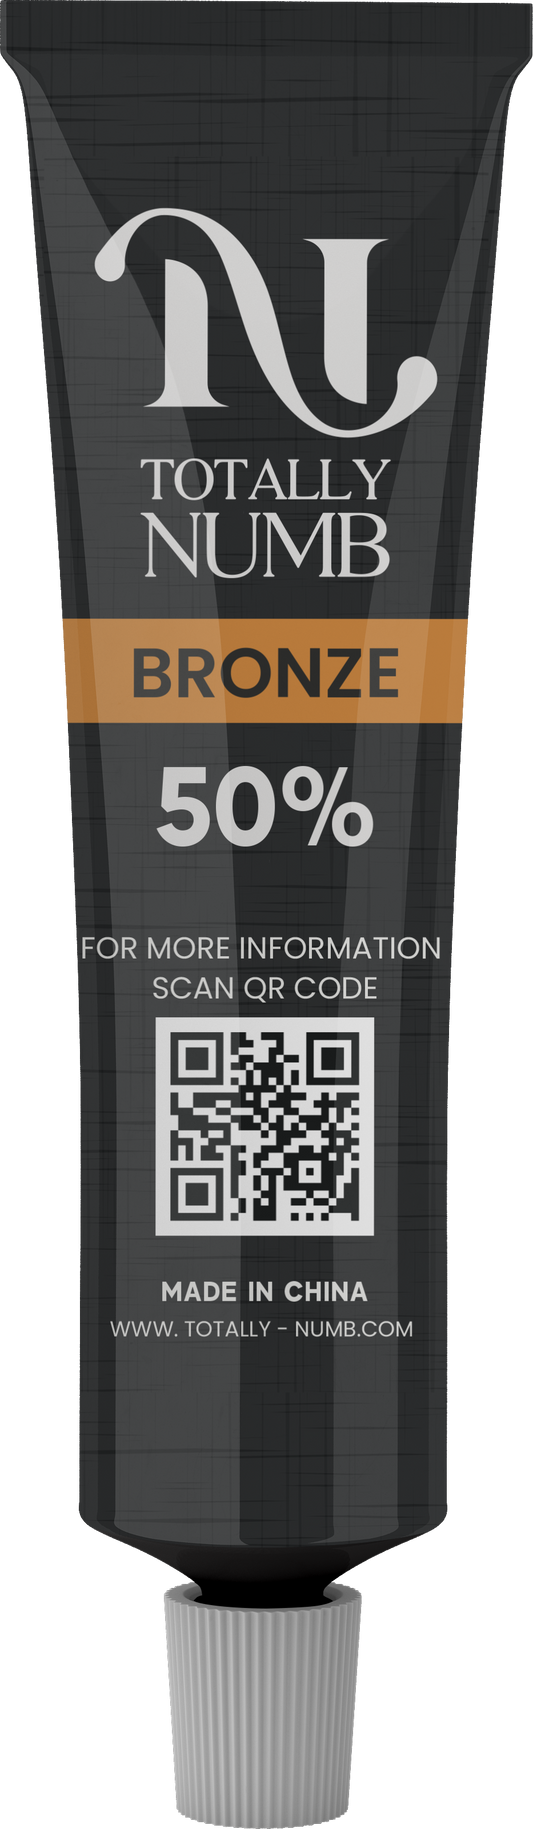 50% BRONZE TOTALLY NUMB - 30g-Totally Numb-Numb-Me.co